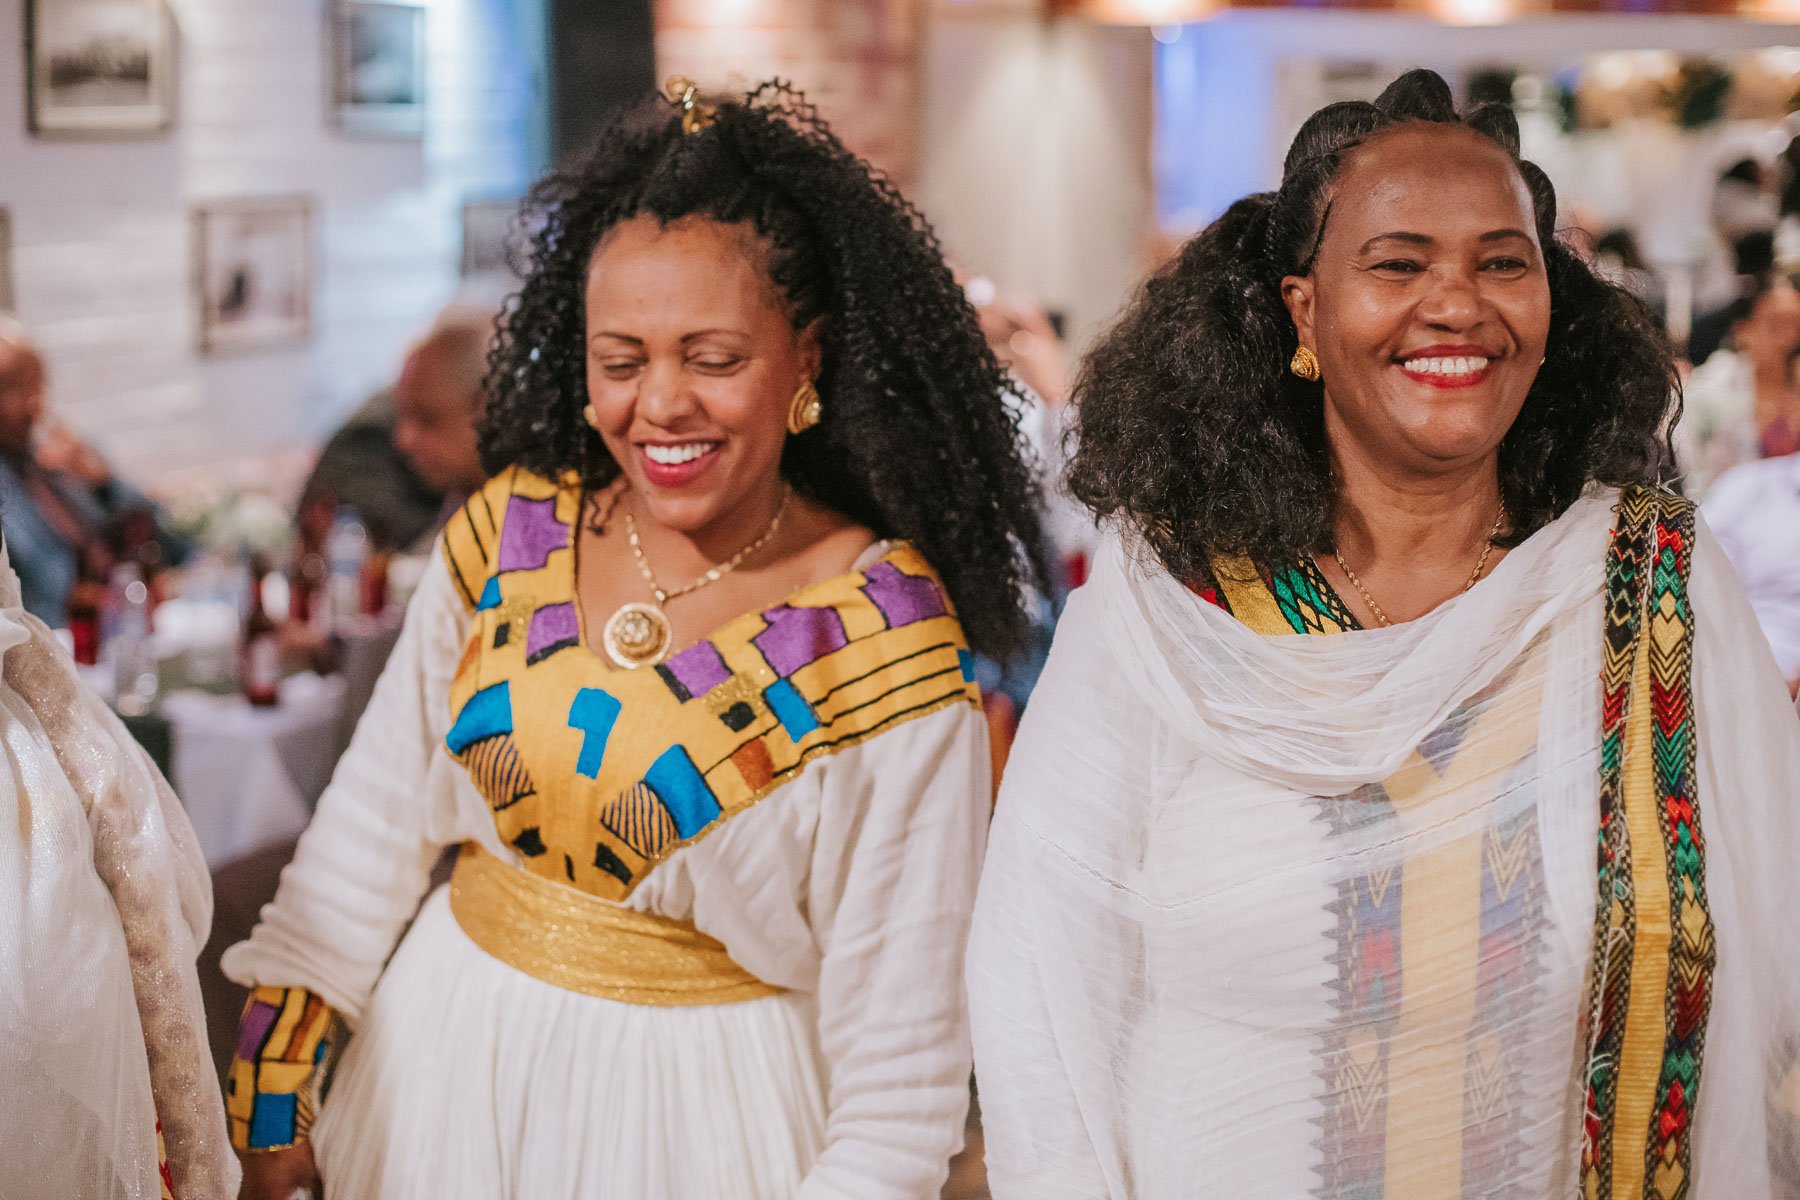 Guests of the Christening dancing and dressed in traditional Eritrean dress.